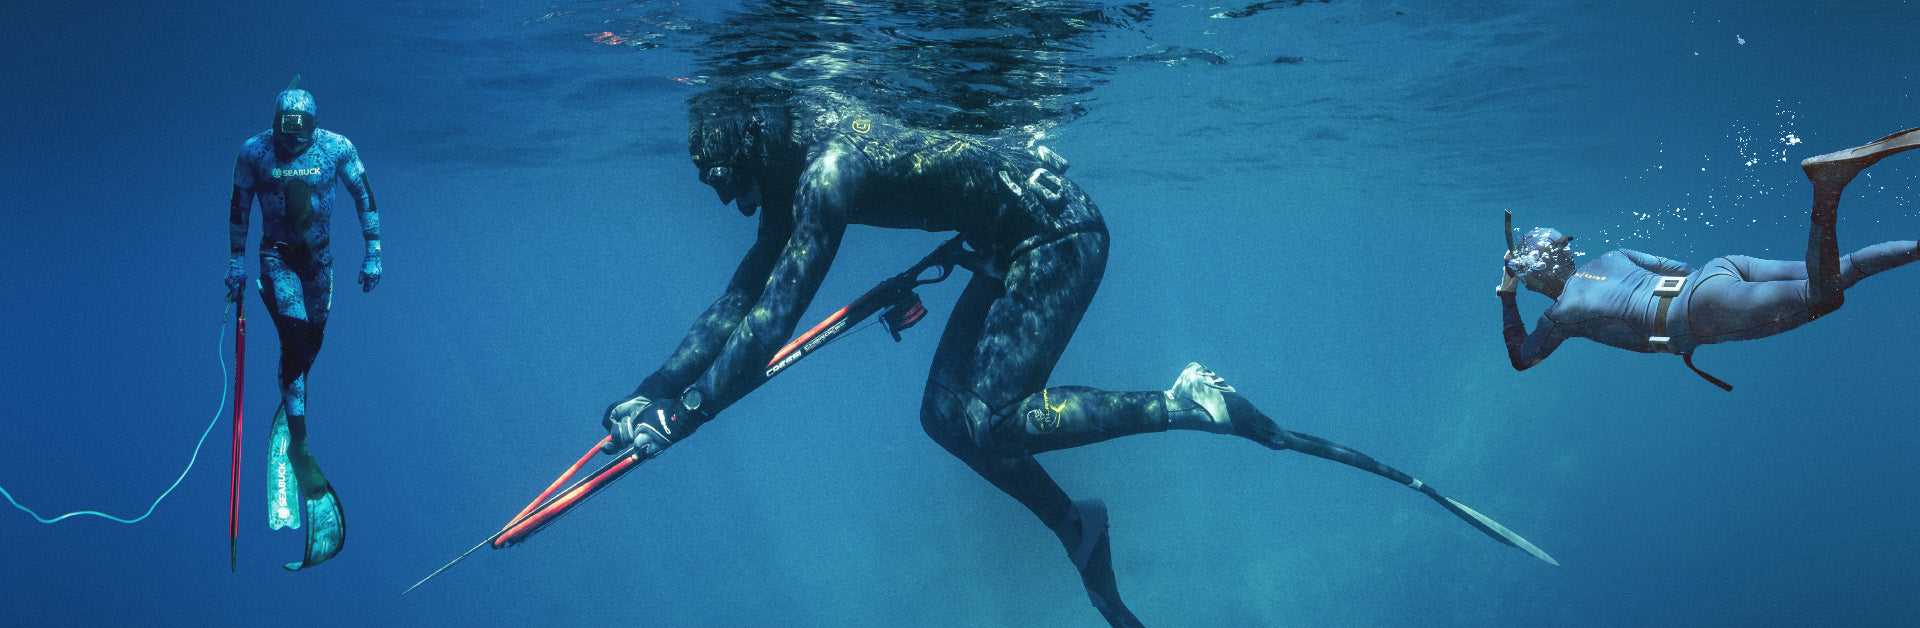 Spearfishing and Freediving